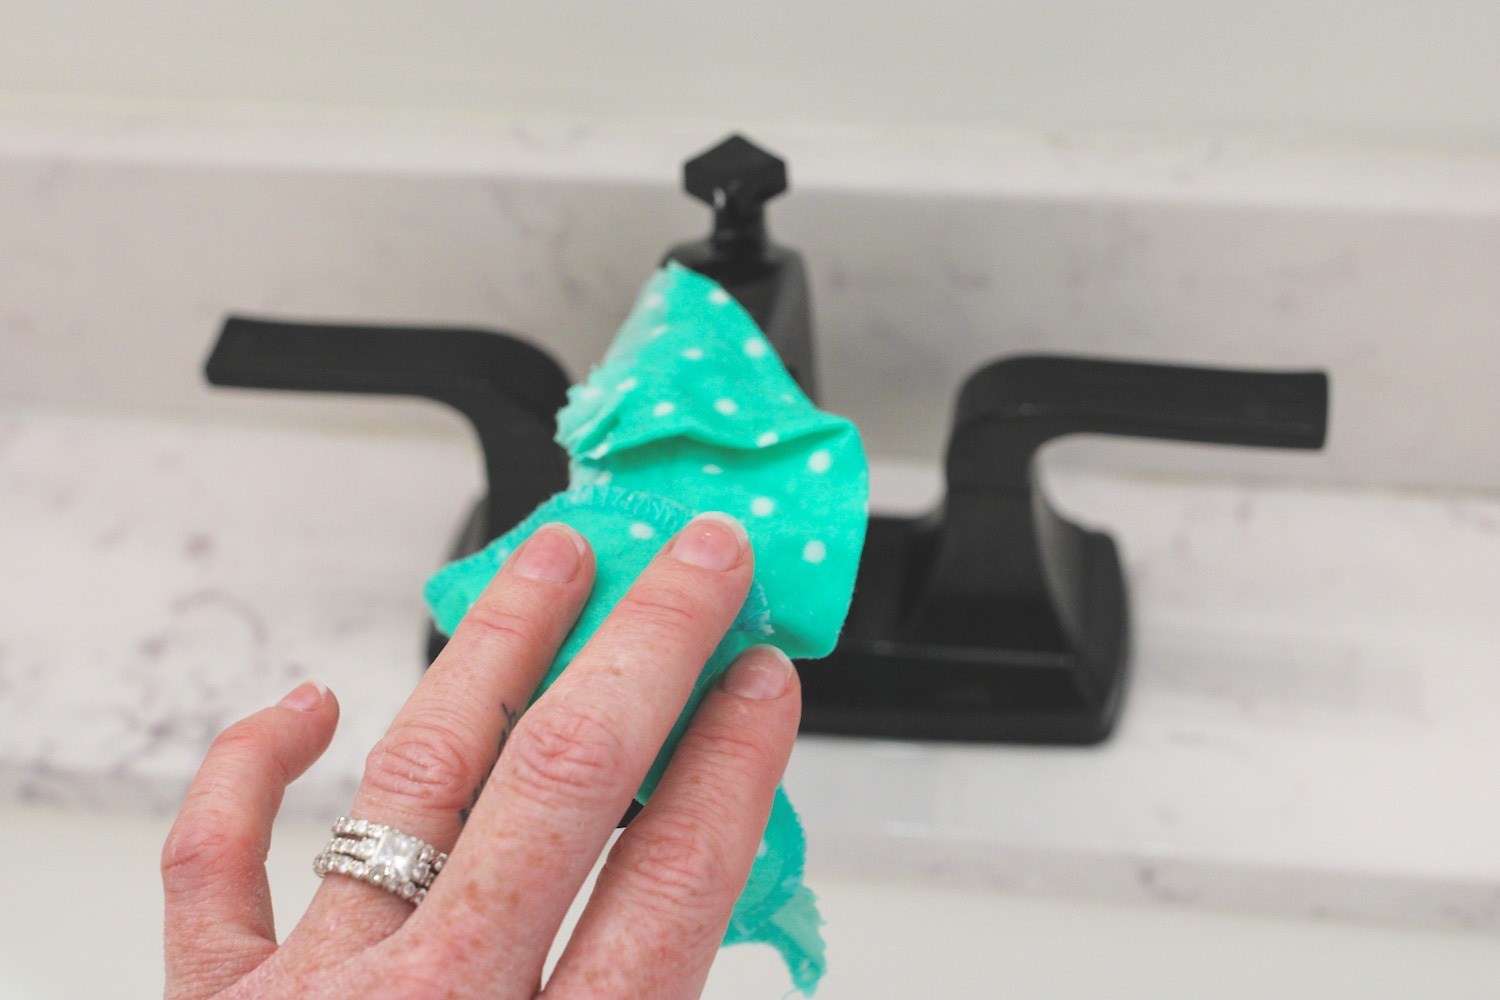 hand wearing diamond wedding bands uses a turquoise cotton cloth to wipe a black bathroom faucet